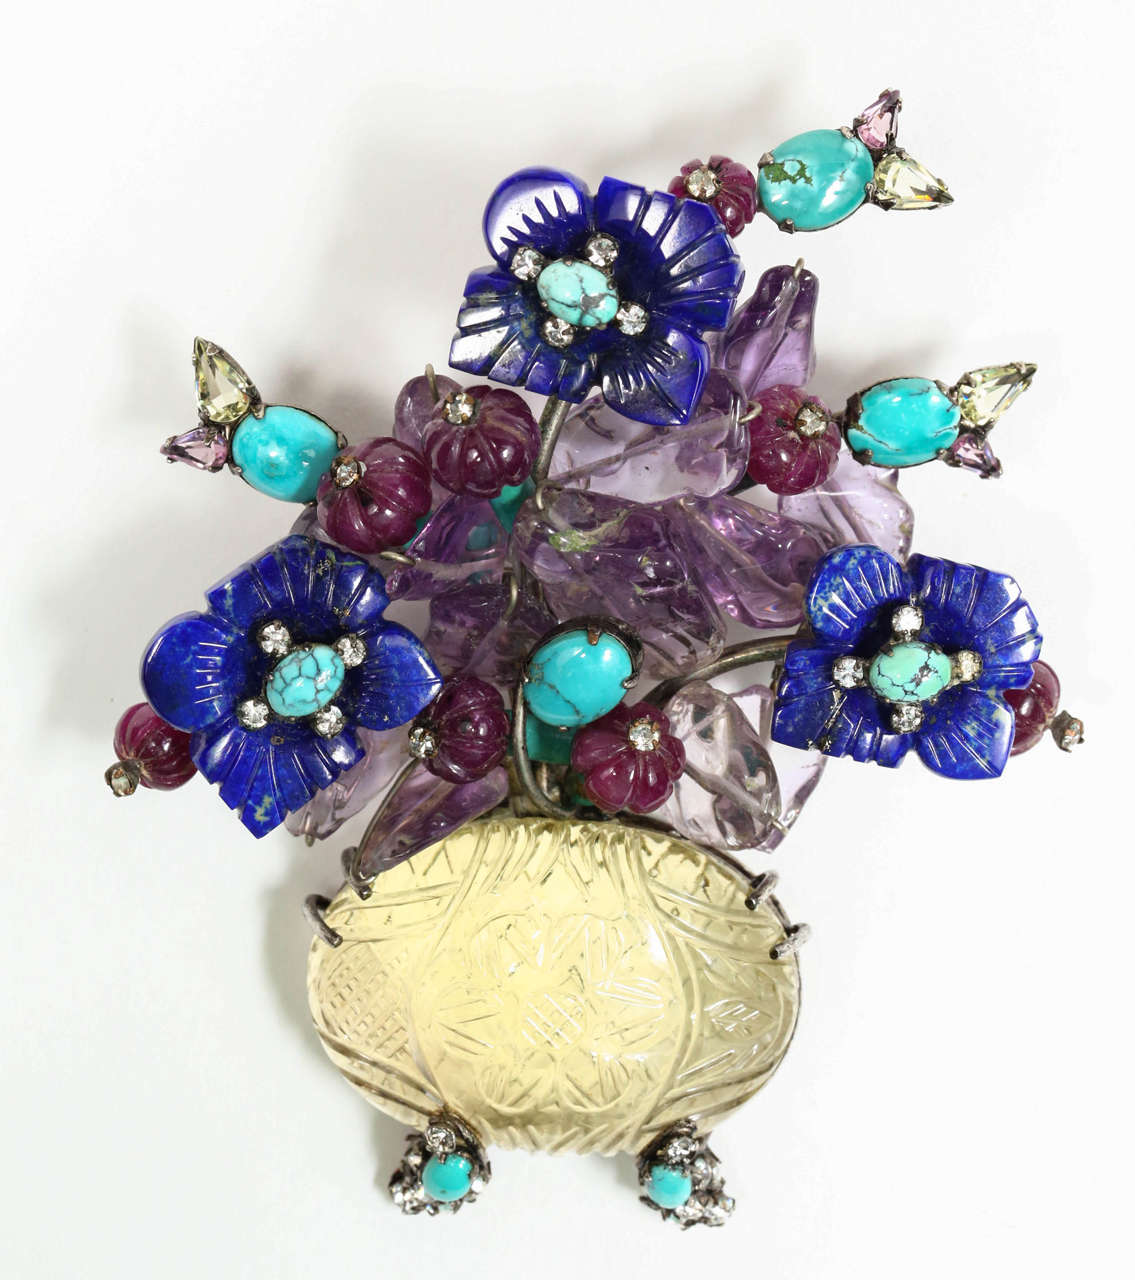 A beautiful and colorful brooch of a vase of flowers by Iradj Moini. The pin is composed of lapis, turquoise, ruby, amethyst, citrine and rhinestones and is marked on the back with the Iradj Moini plaque (see Image 6).